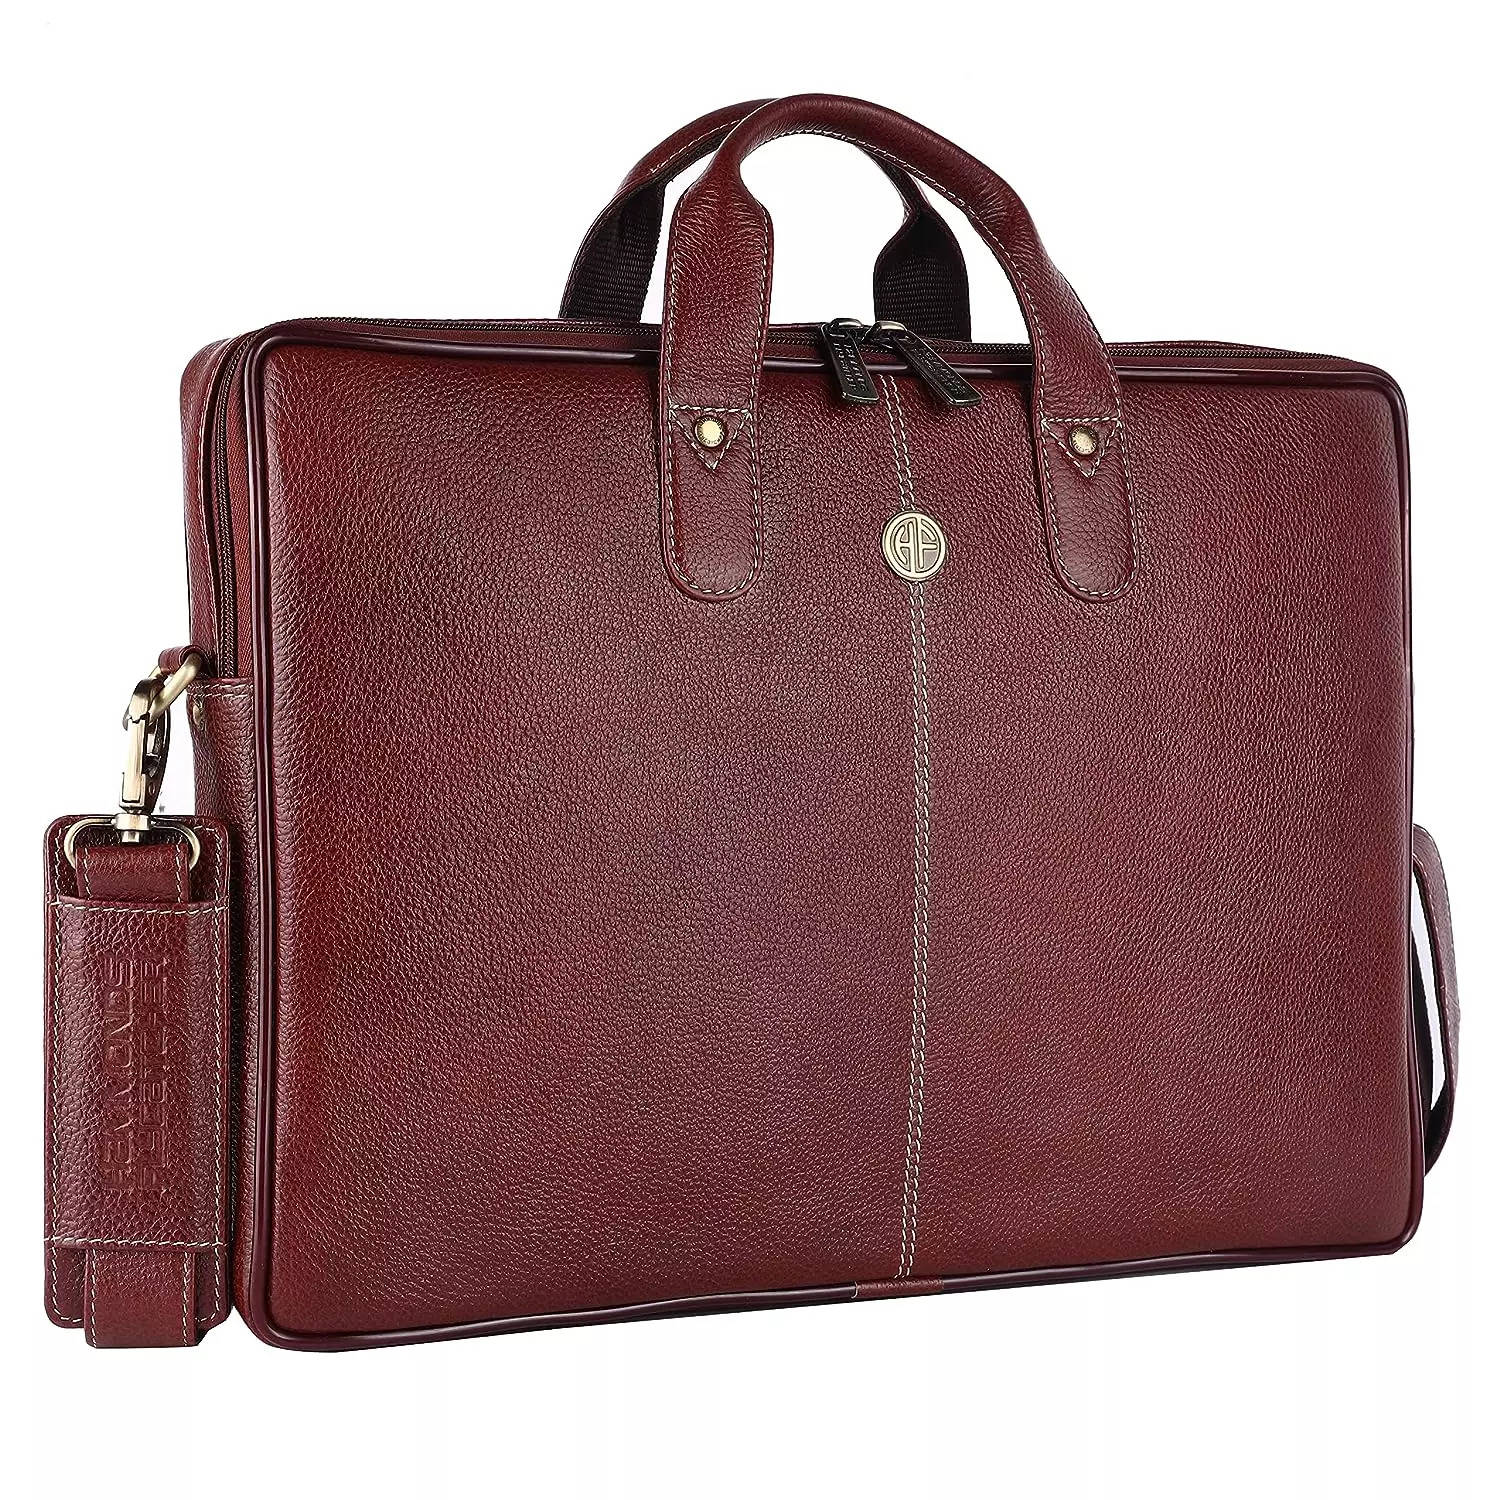 RSN 13 Inch Leather Bags Office Laptop And Messenger Bag For  Men/Women/Boys/Girls/Male/Female Branded For School/College/Office/Casual/Daily  Use : Amazon.in: Computers & Accessories